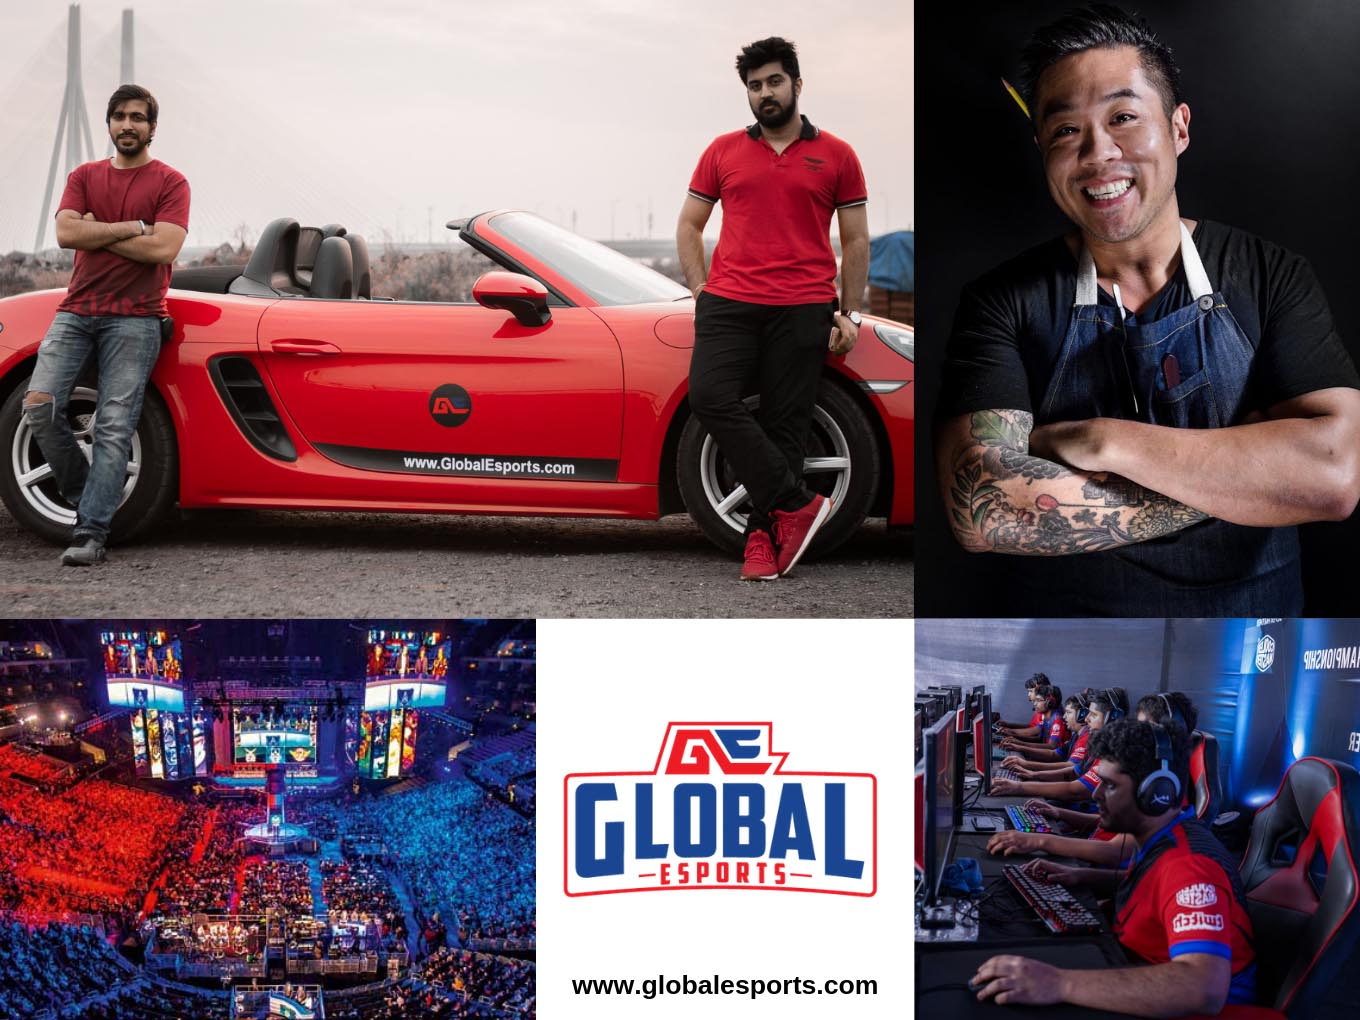 Global eSports Takes Over International Competitive Video Gaming